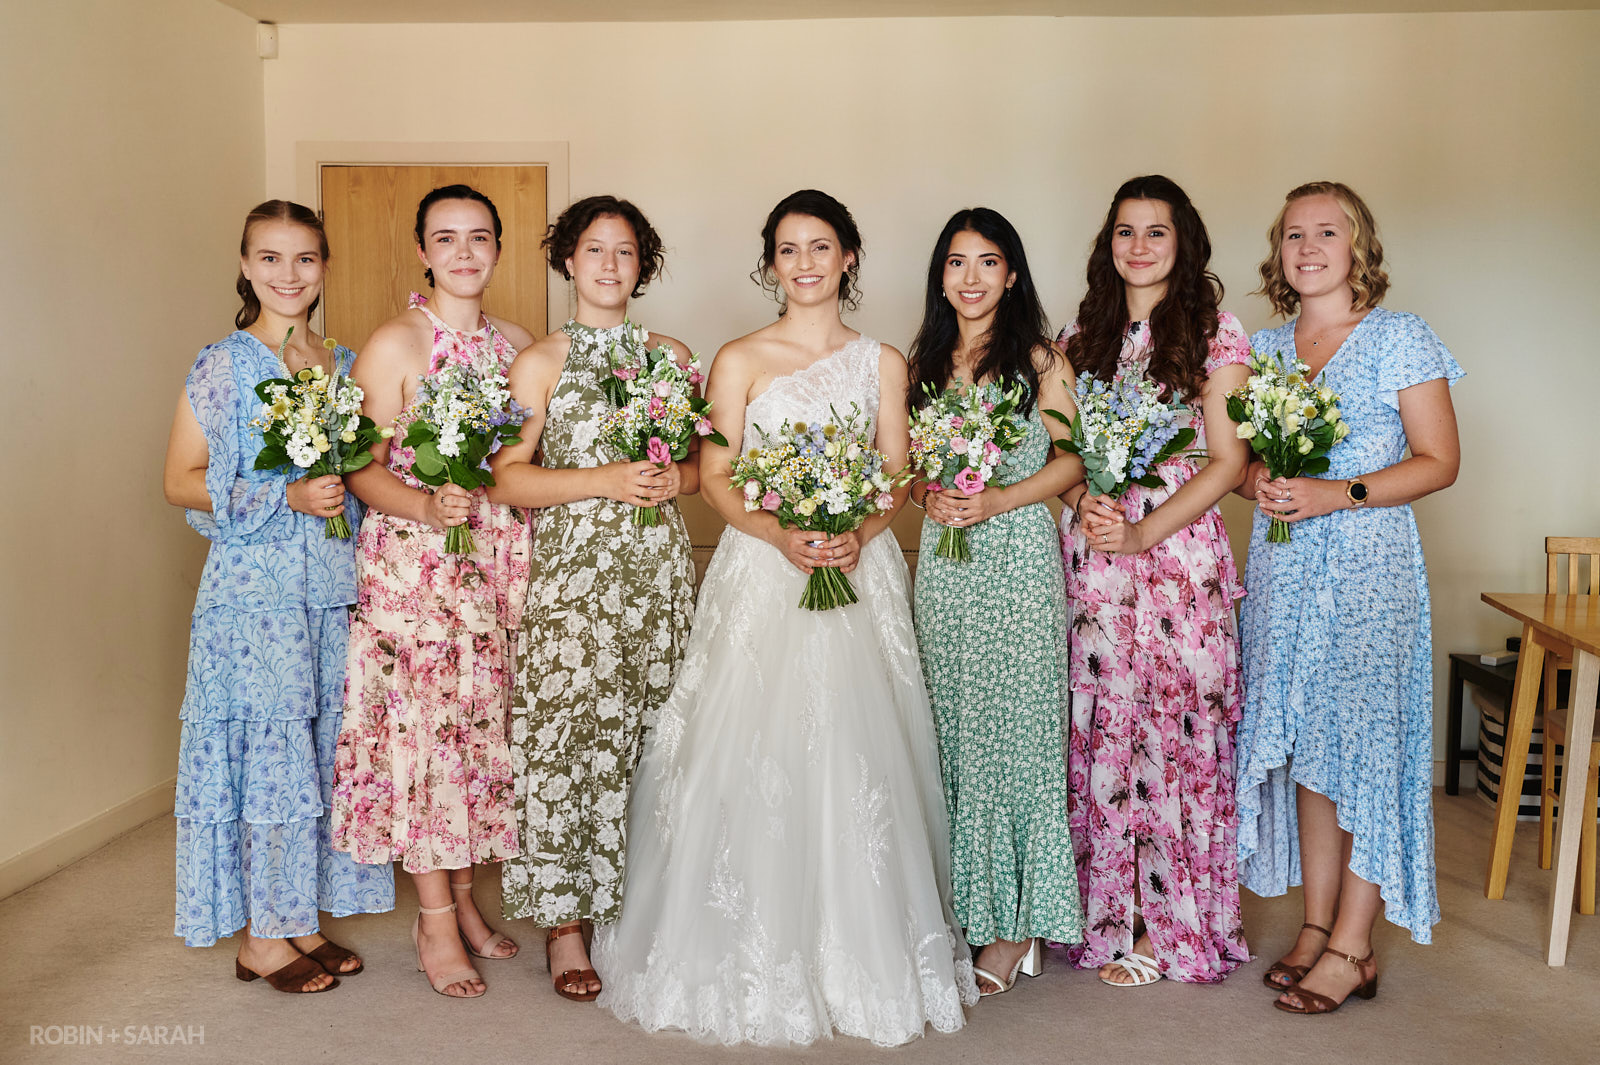 Group photo of bride and bridesmaids